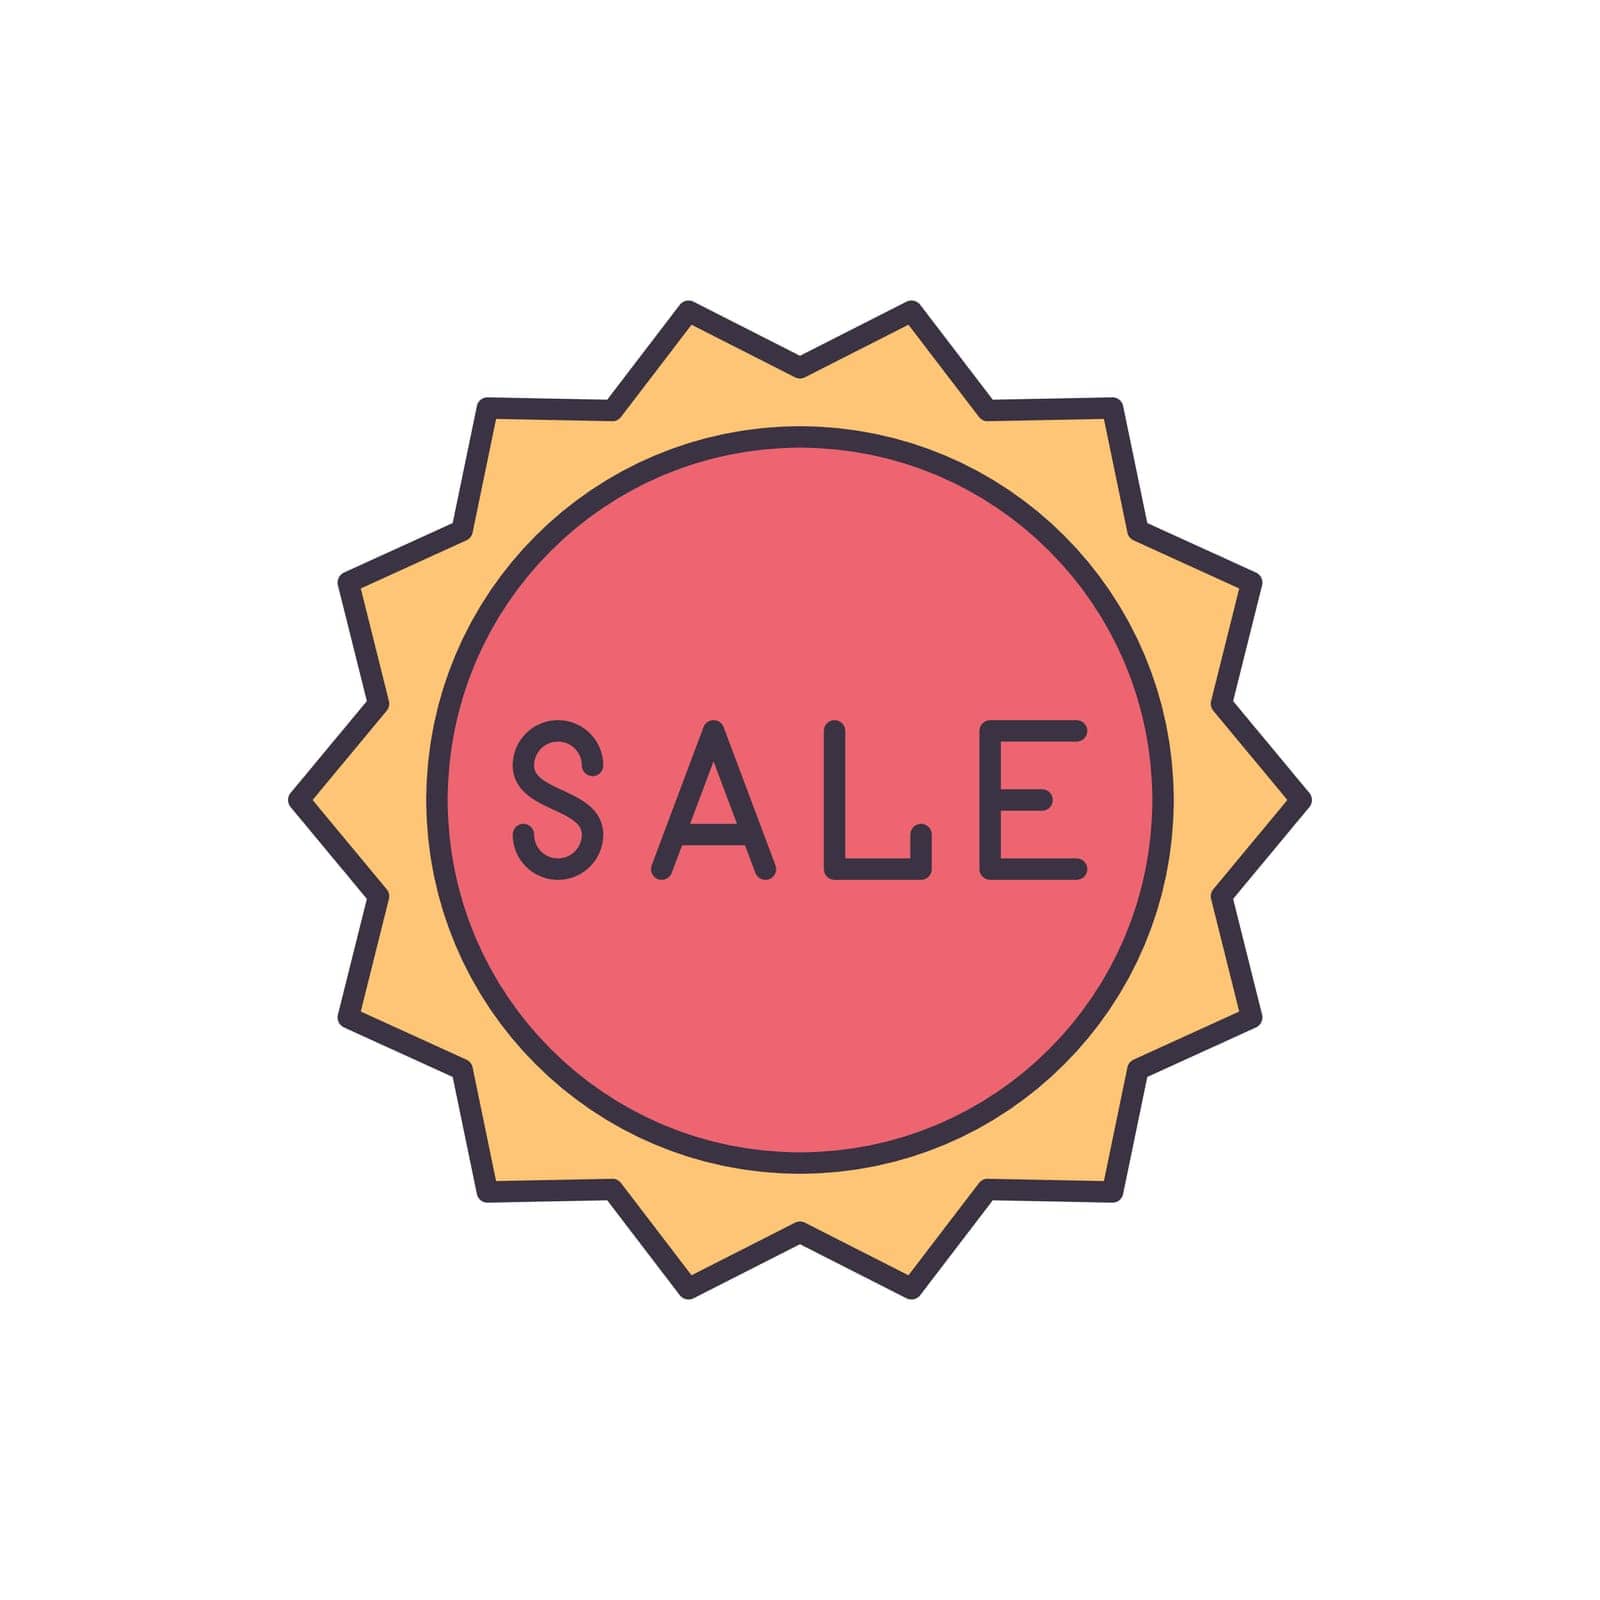 Sale Badge related vector icon by smoki